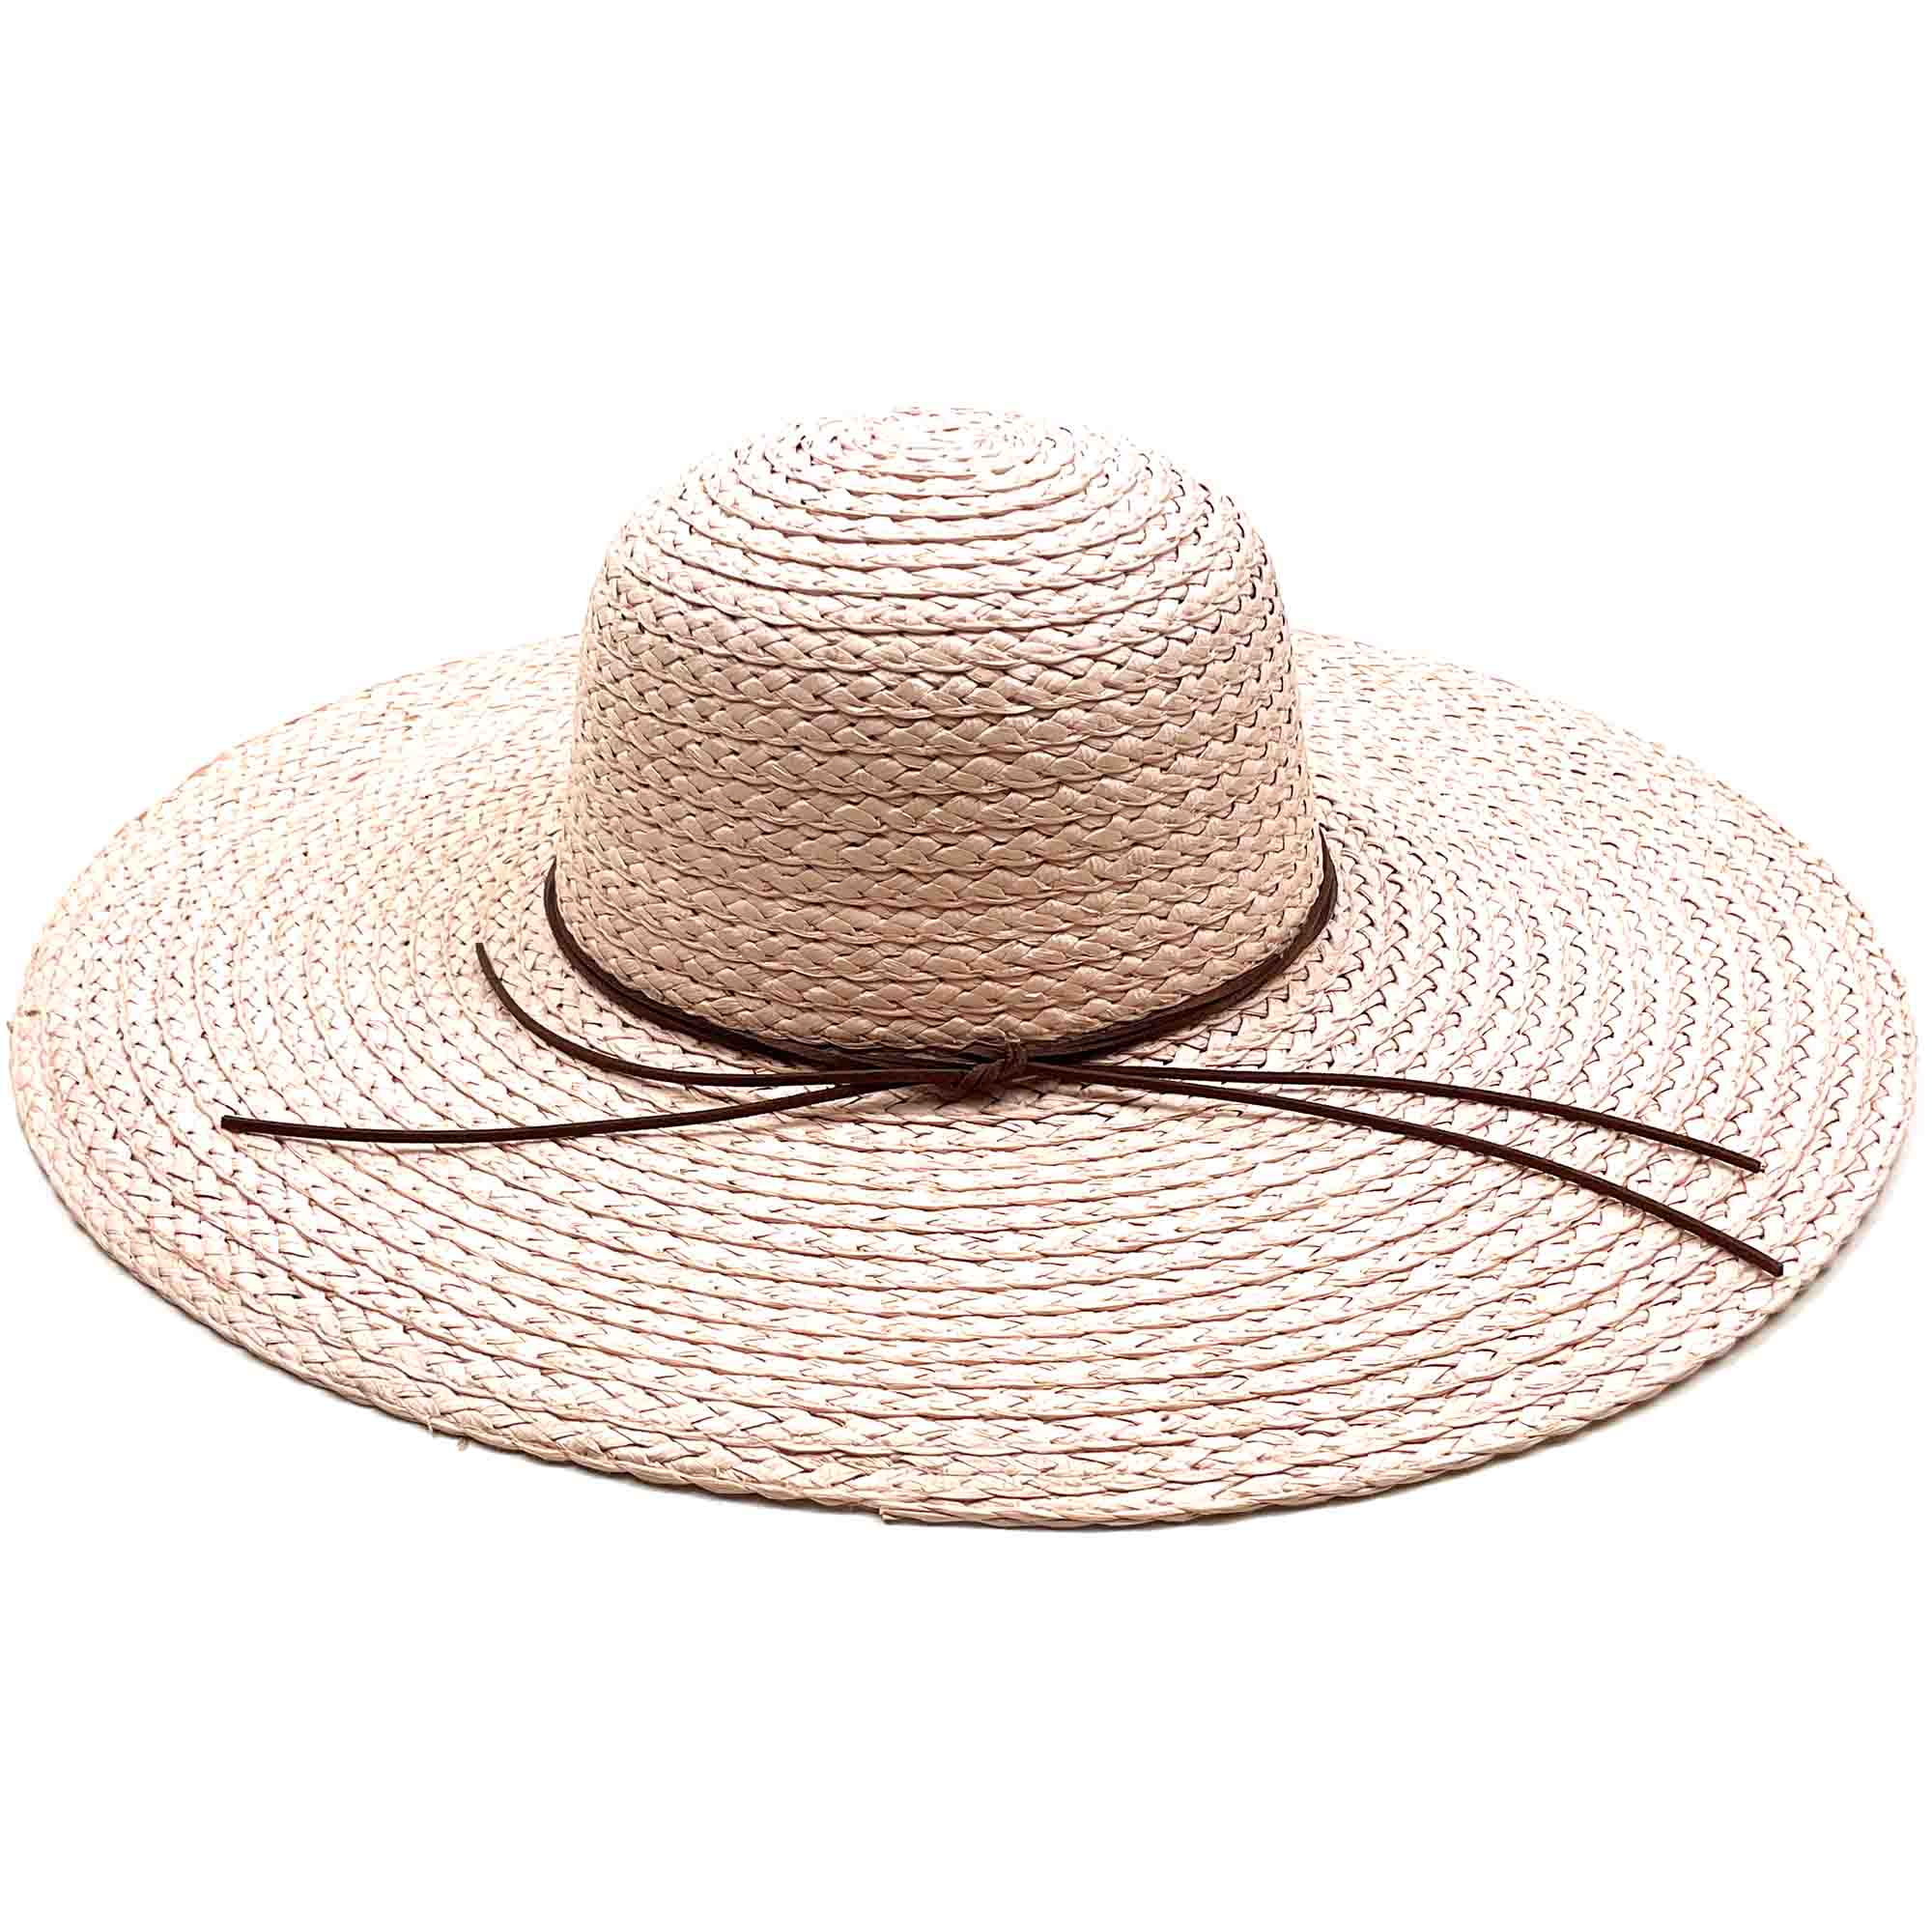 Wide Brim Braided Floppy Beach Hat for Large Heads - Fadivo Hats Black / Large (58.5 cm)